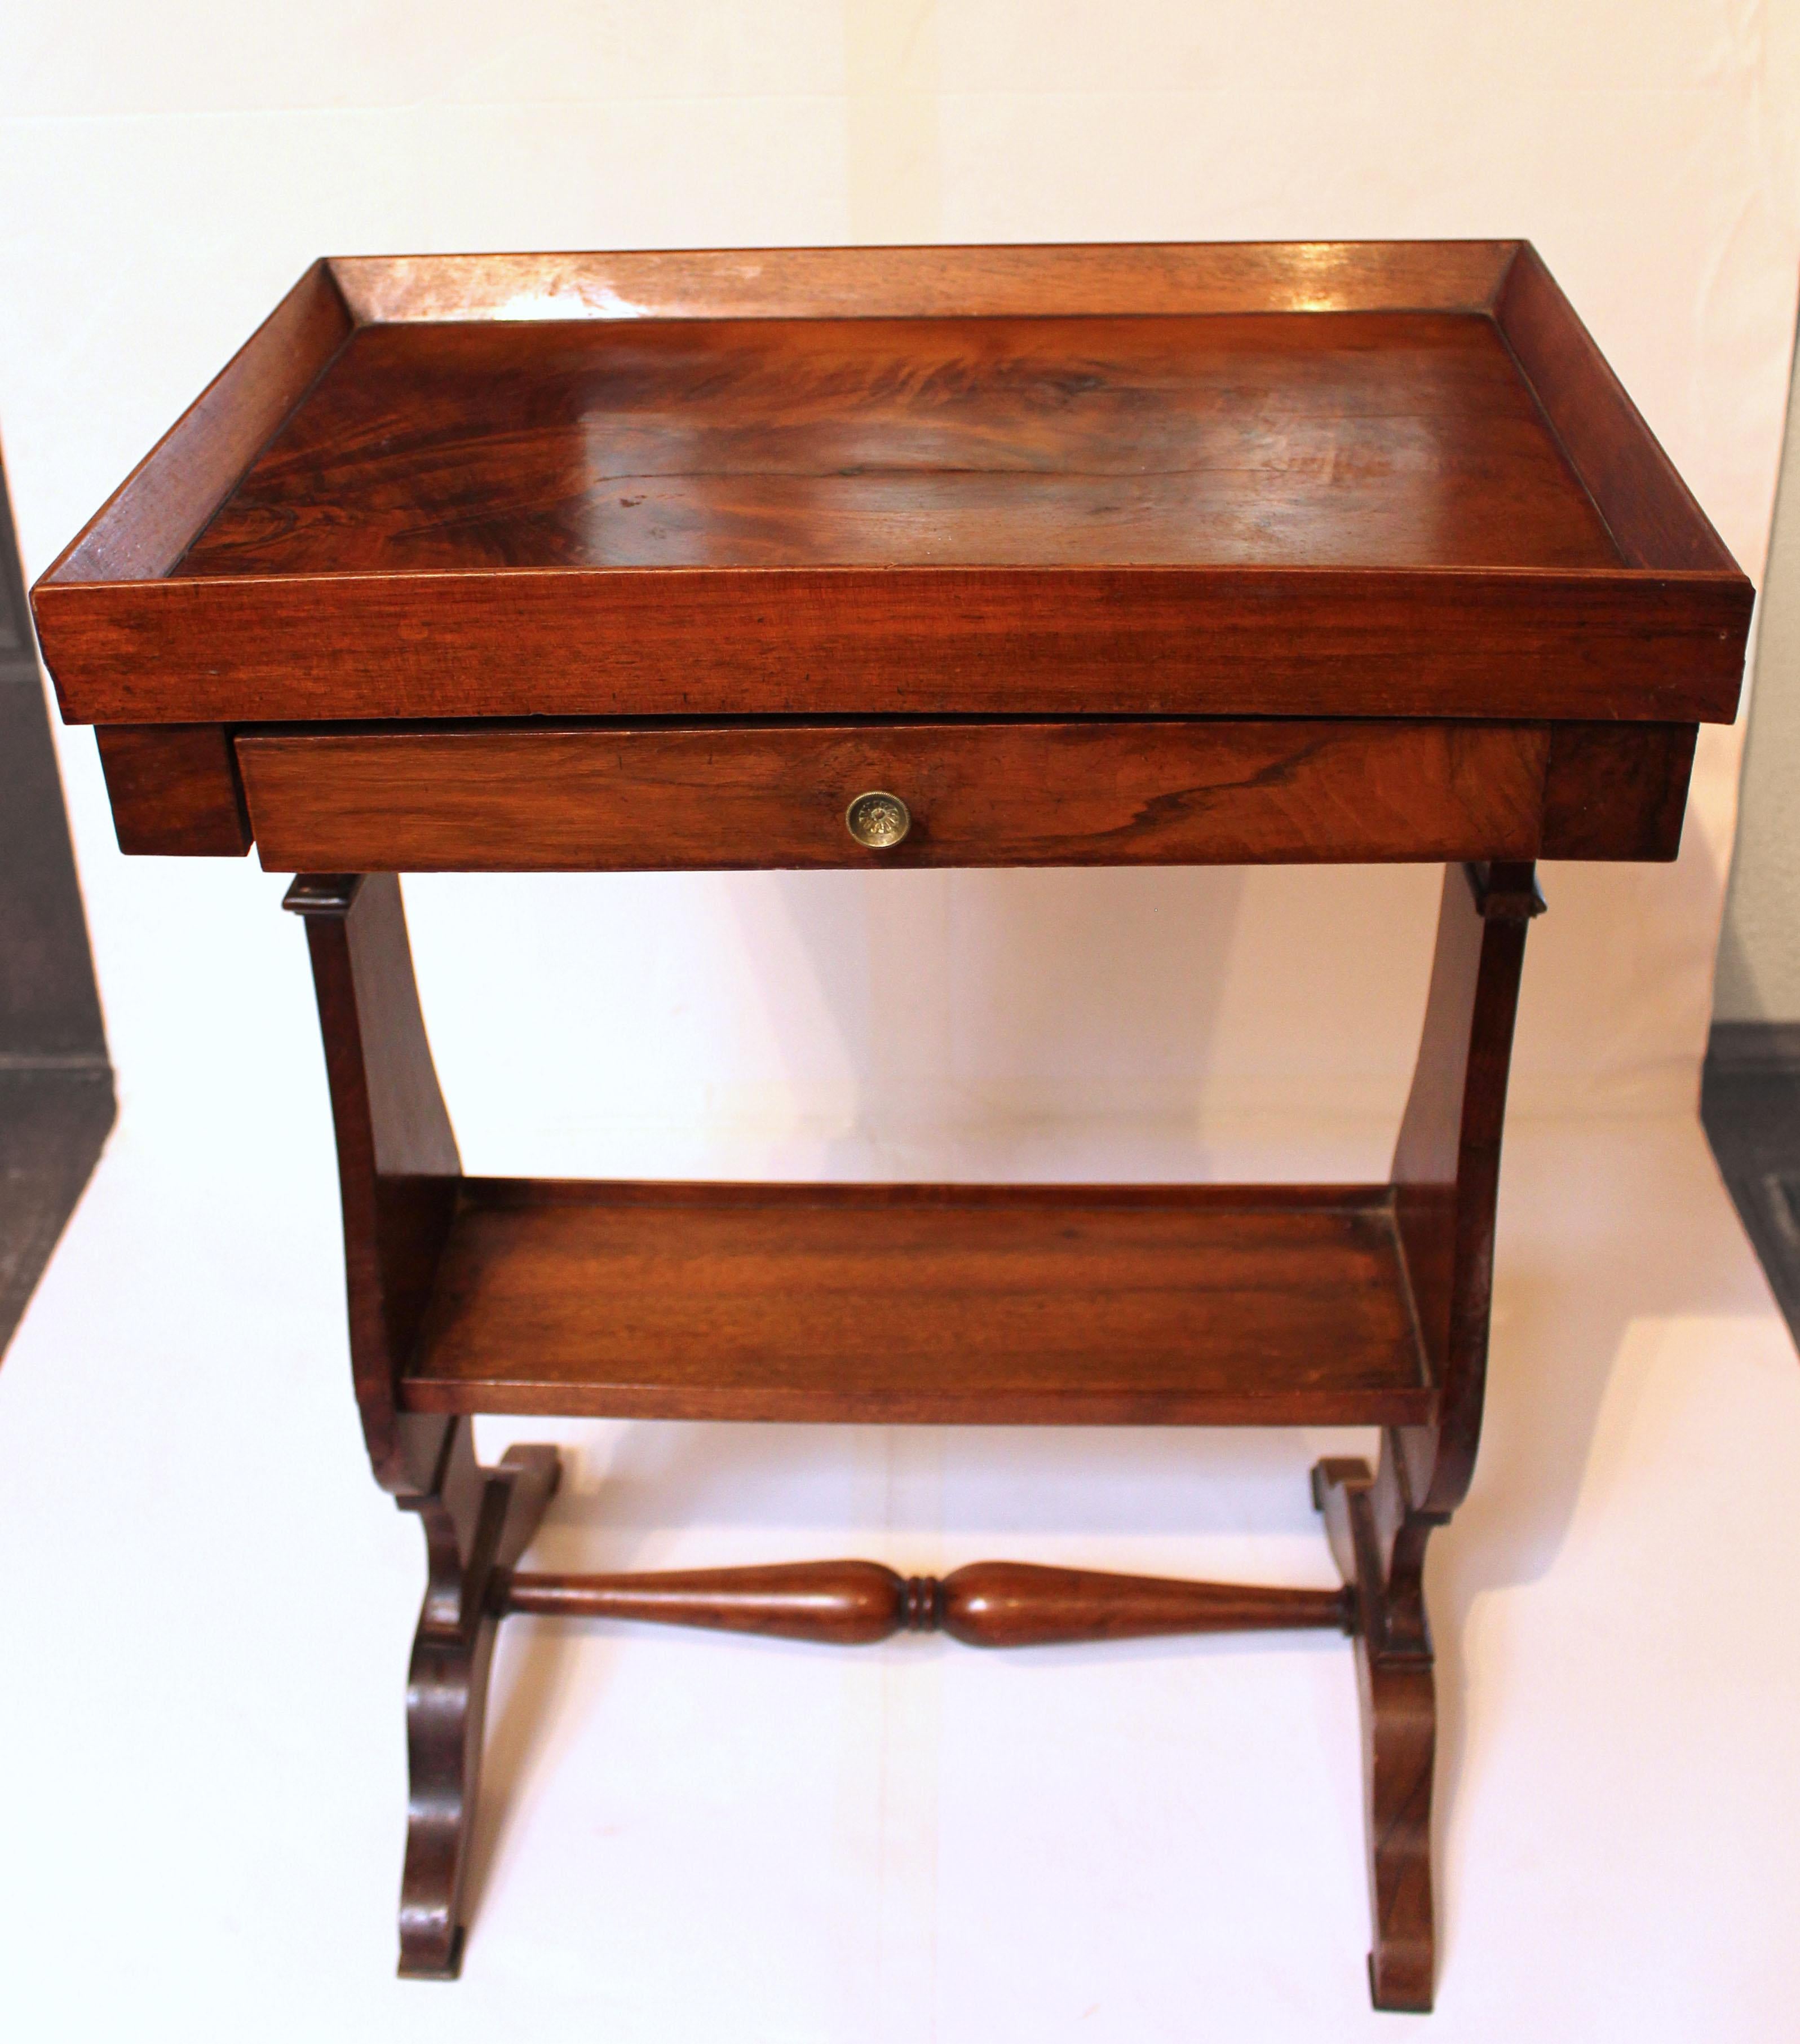 Circa 1840 Louis Philippe walnut side table, French. Gallery top over drawer with lower tier. Vasiform sides ending in shoe feet with ring carved double vasi-form turned stretcher.
19